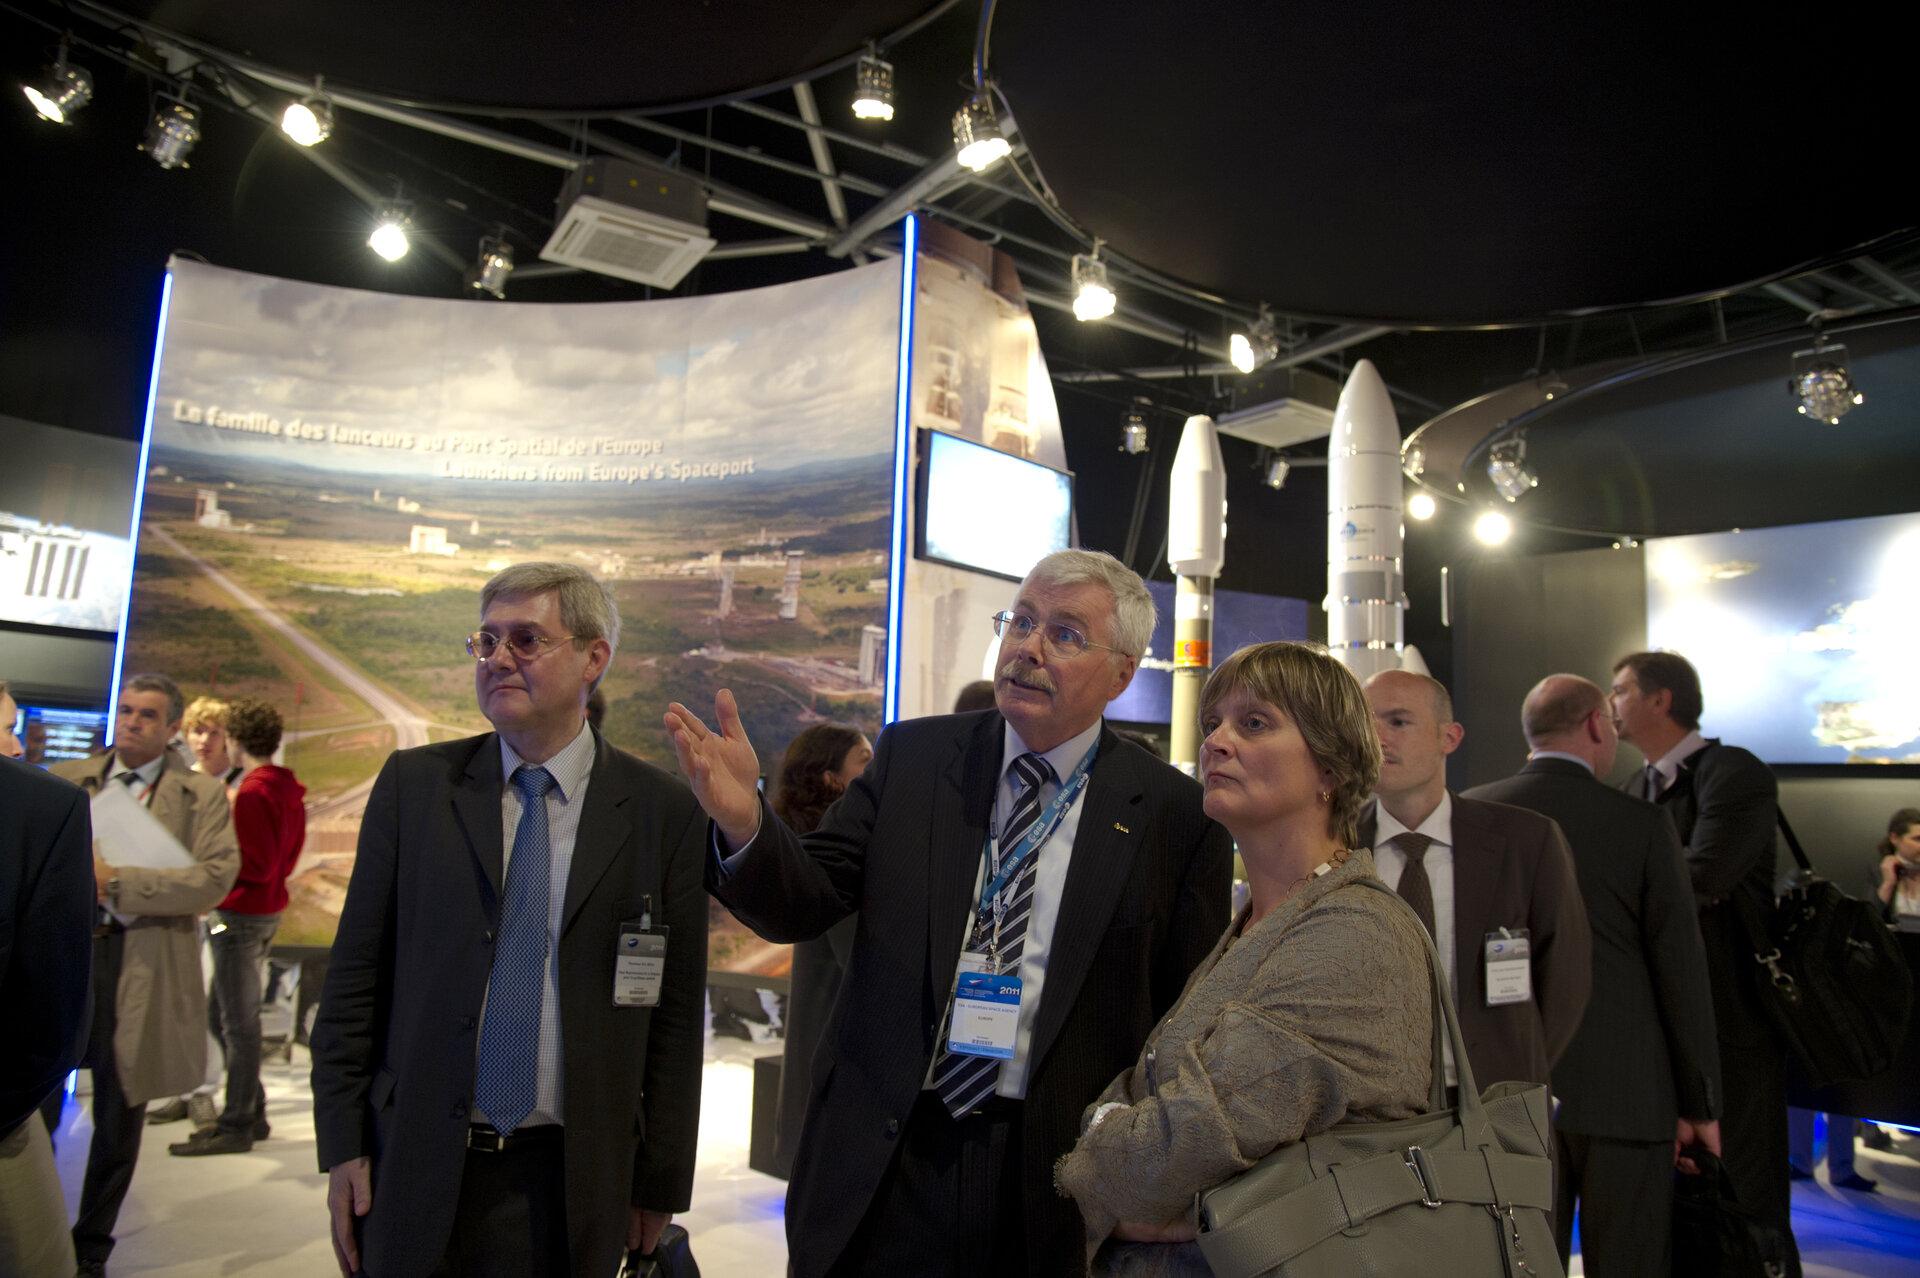 Tour of the pavilion with the Belgian Minister for SMEs